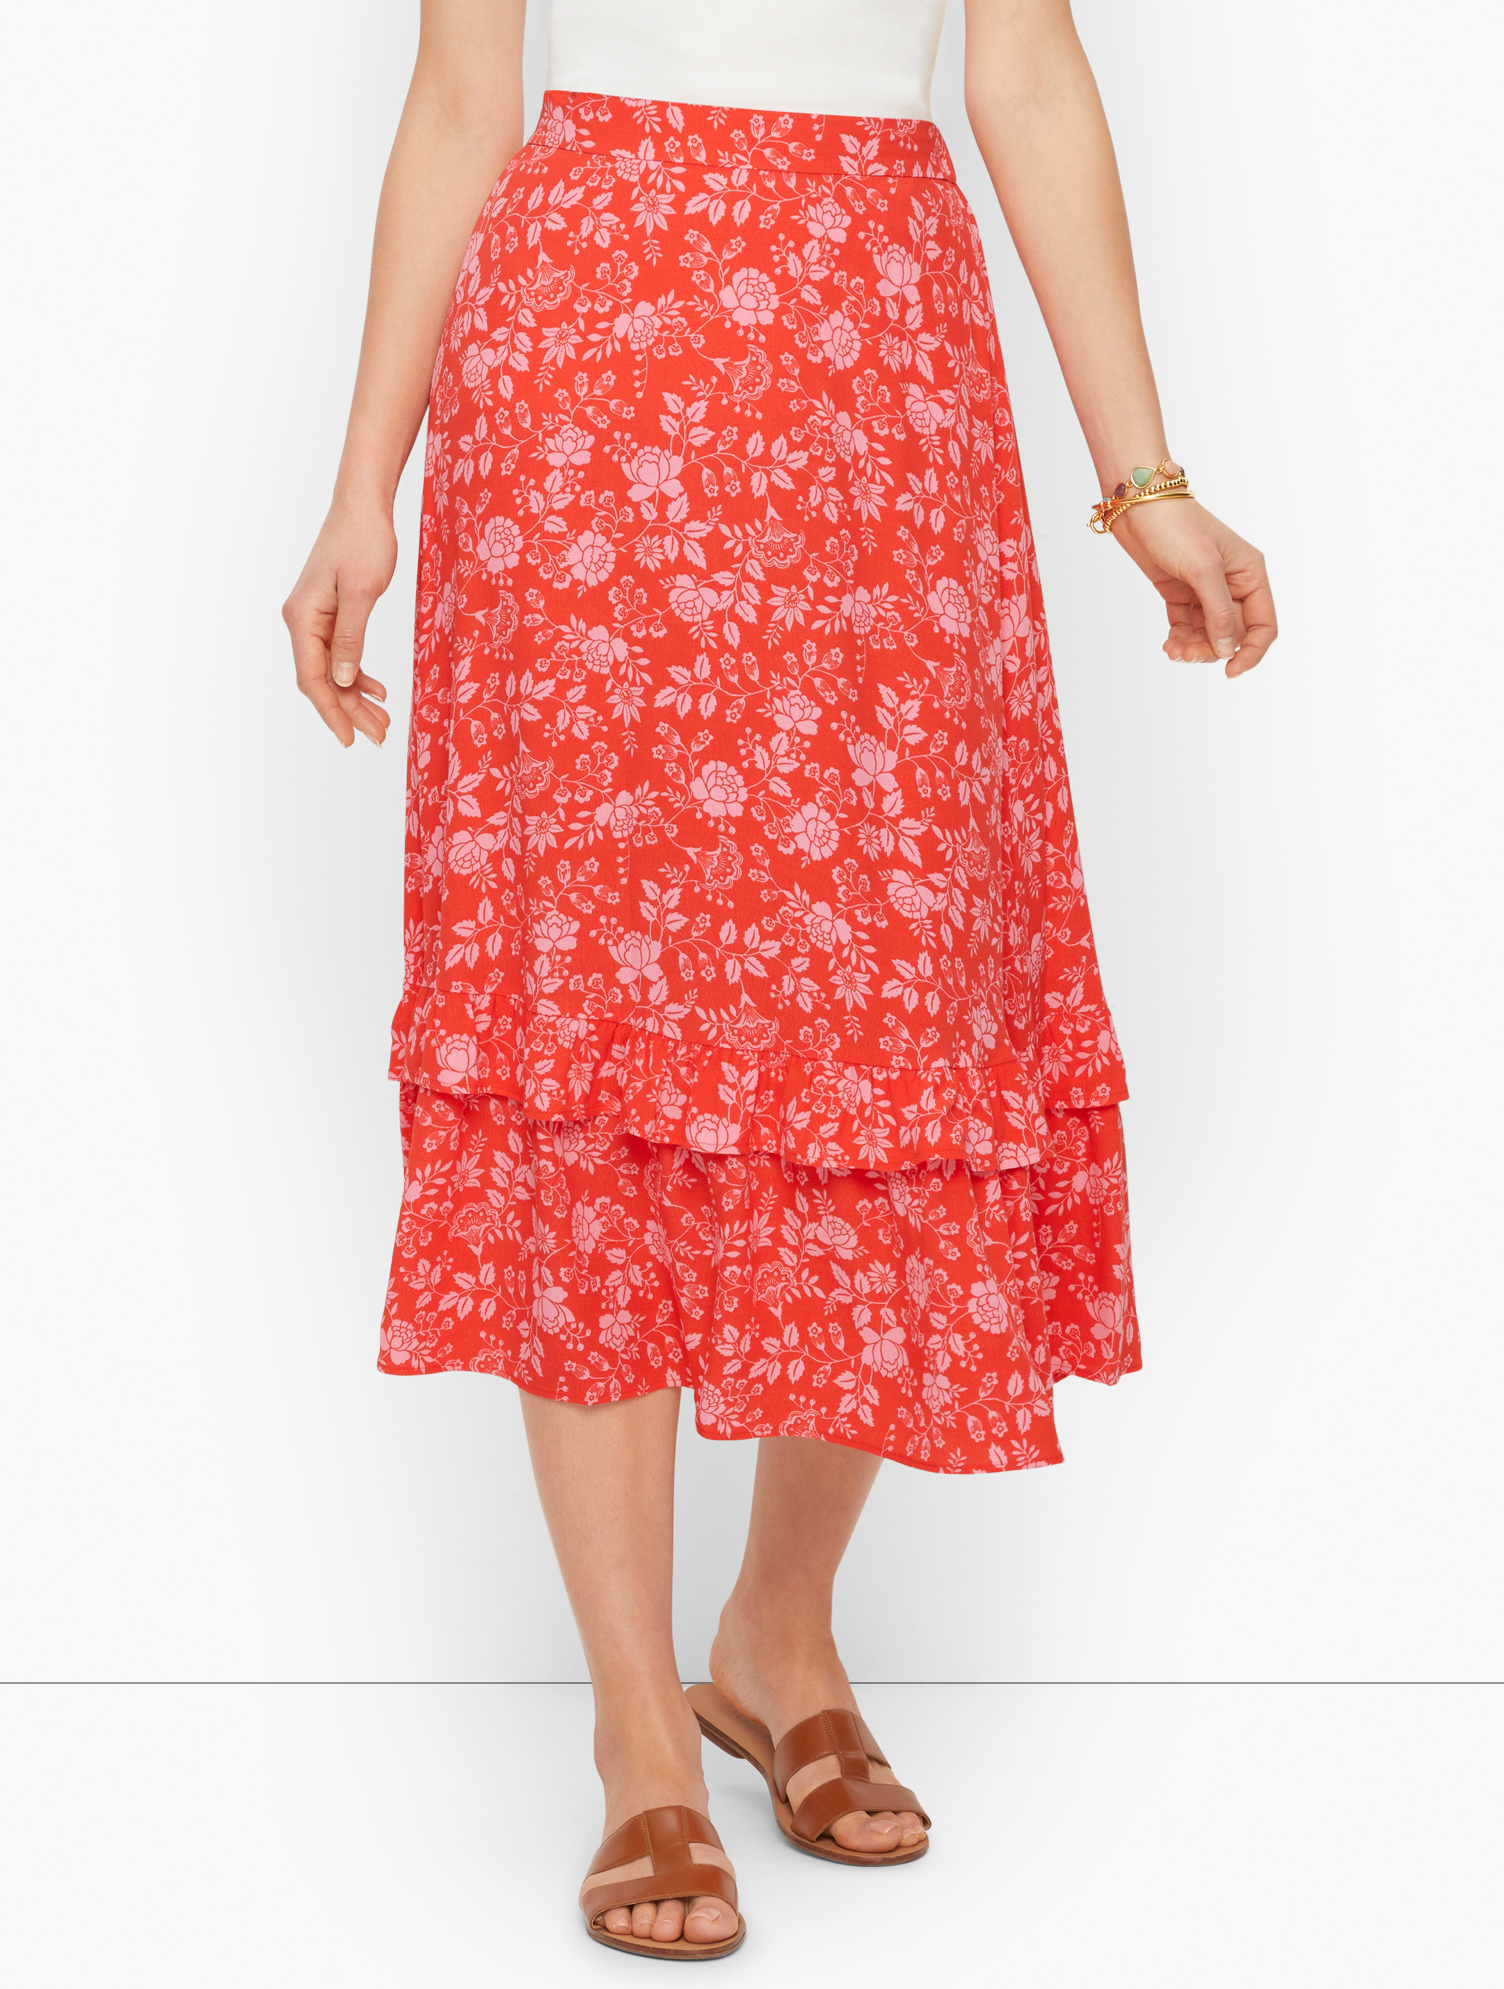 Talbots Petite - Ruffle Tiered Skirt - Bicolor Blossoms - Coral Punch - Small